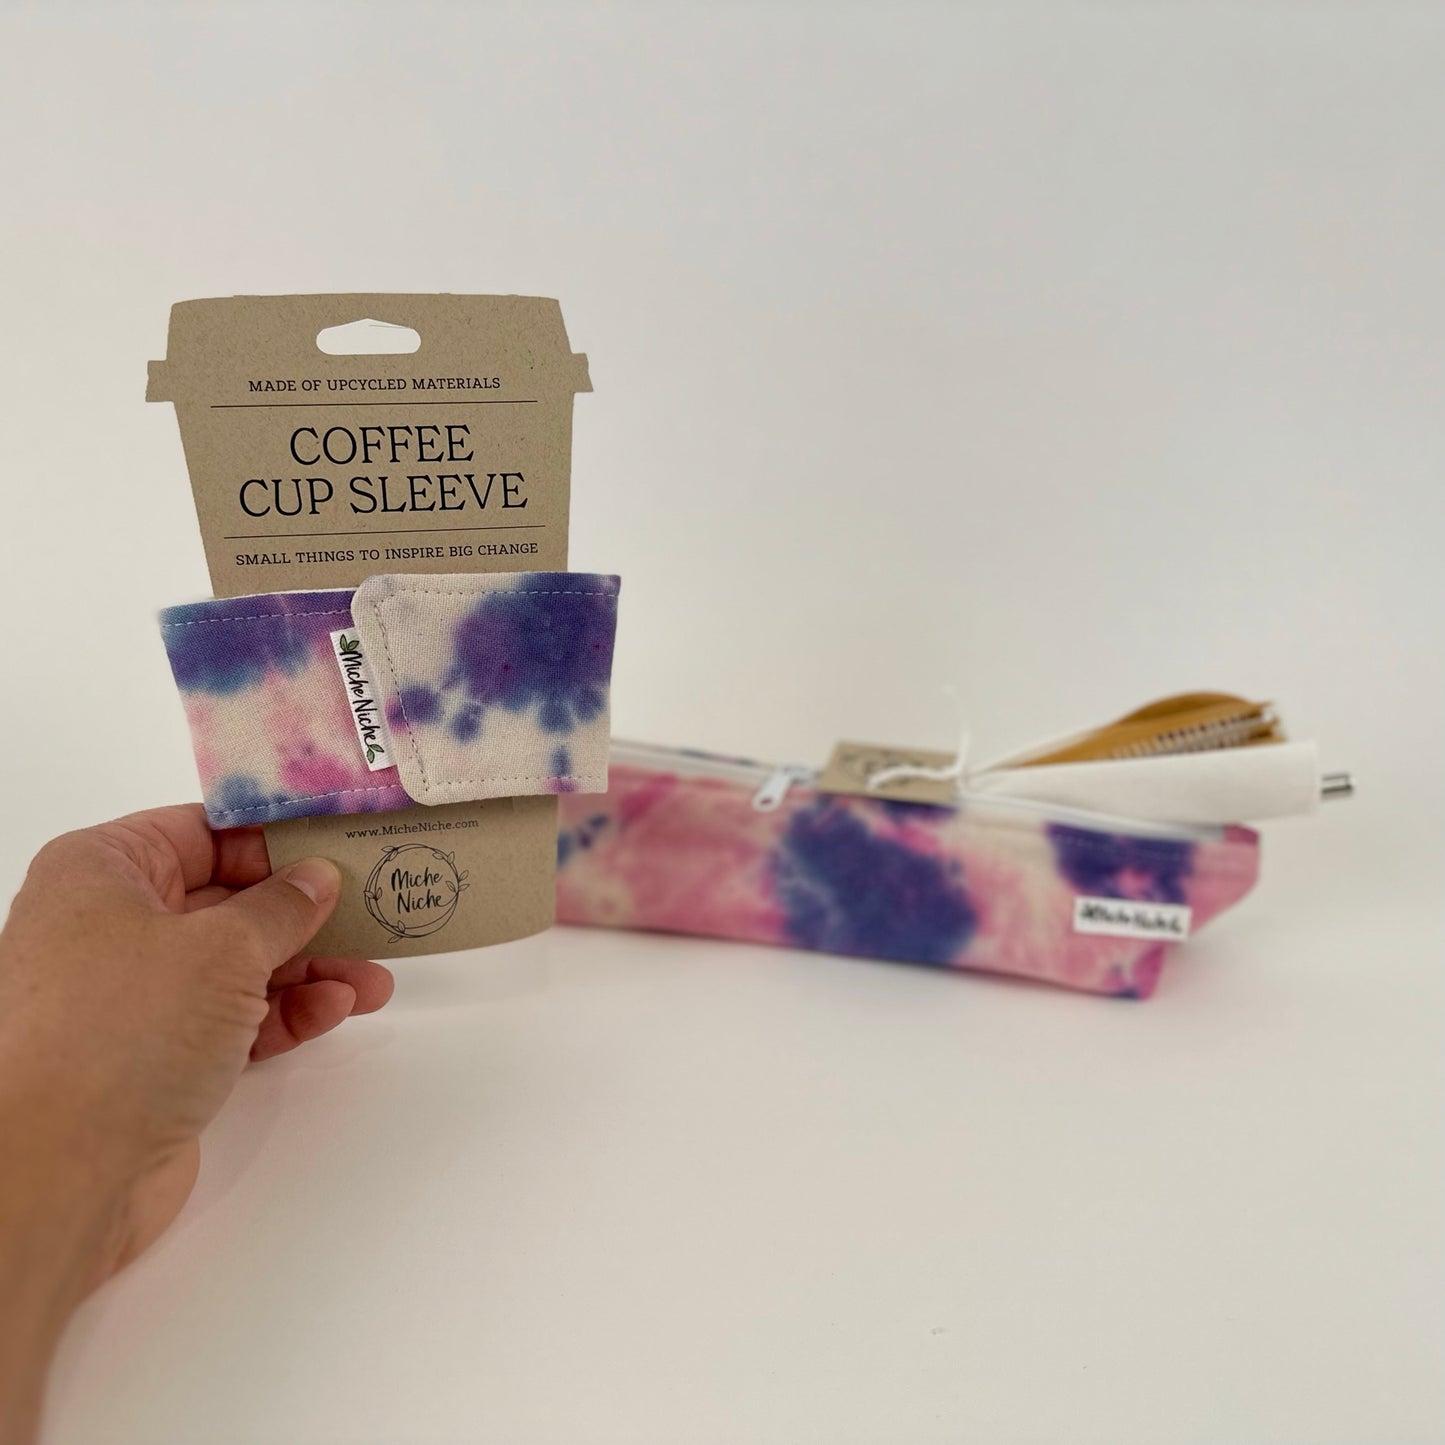 A matching set of a Niche Niche coffee cup sleeve and zipper pouch in a hand dyed blue and pink pattern.